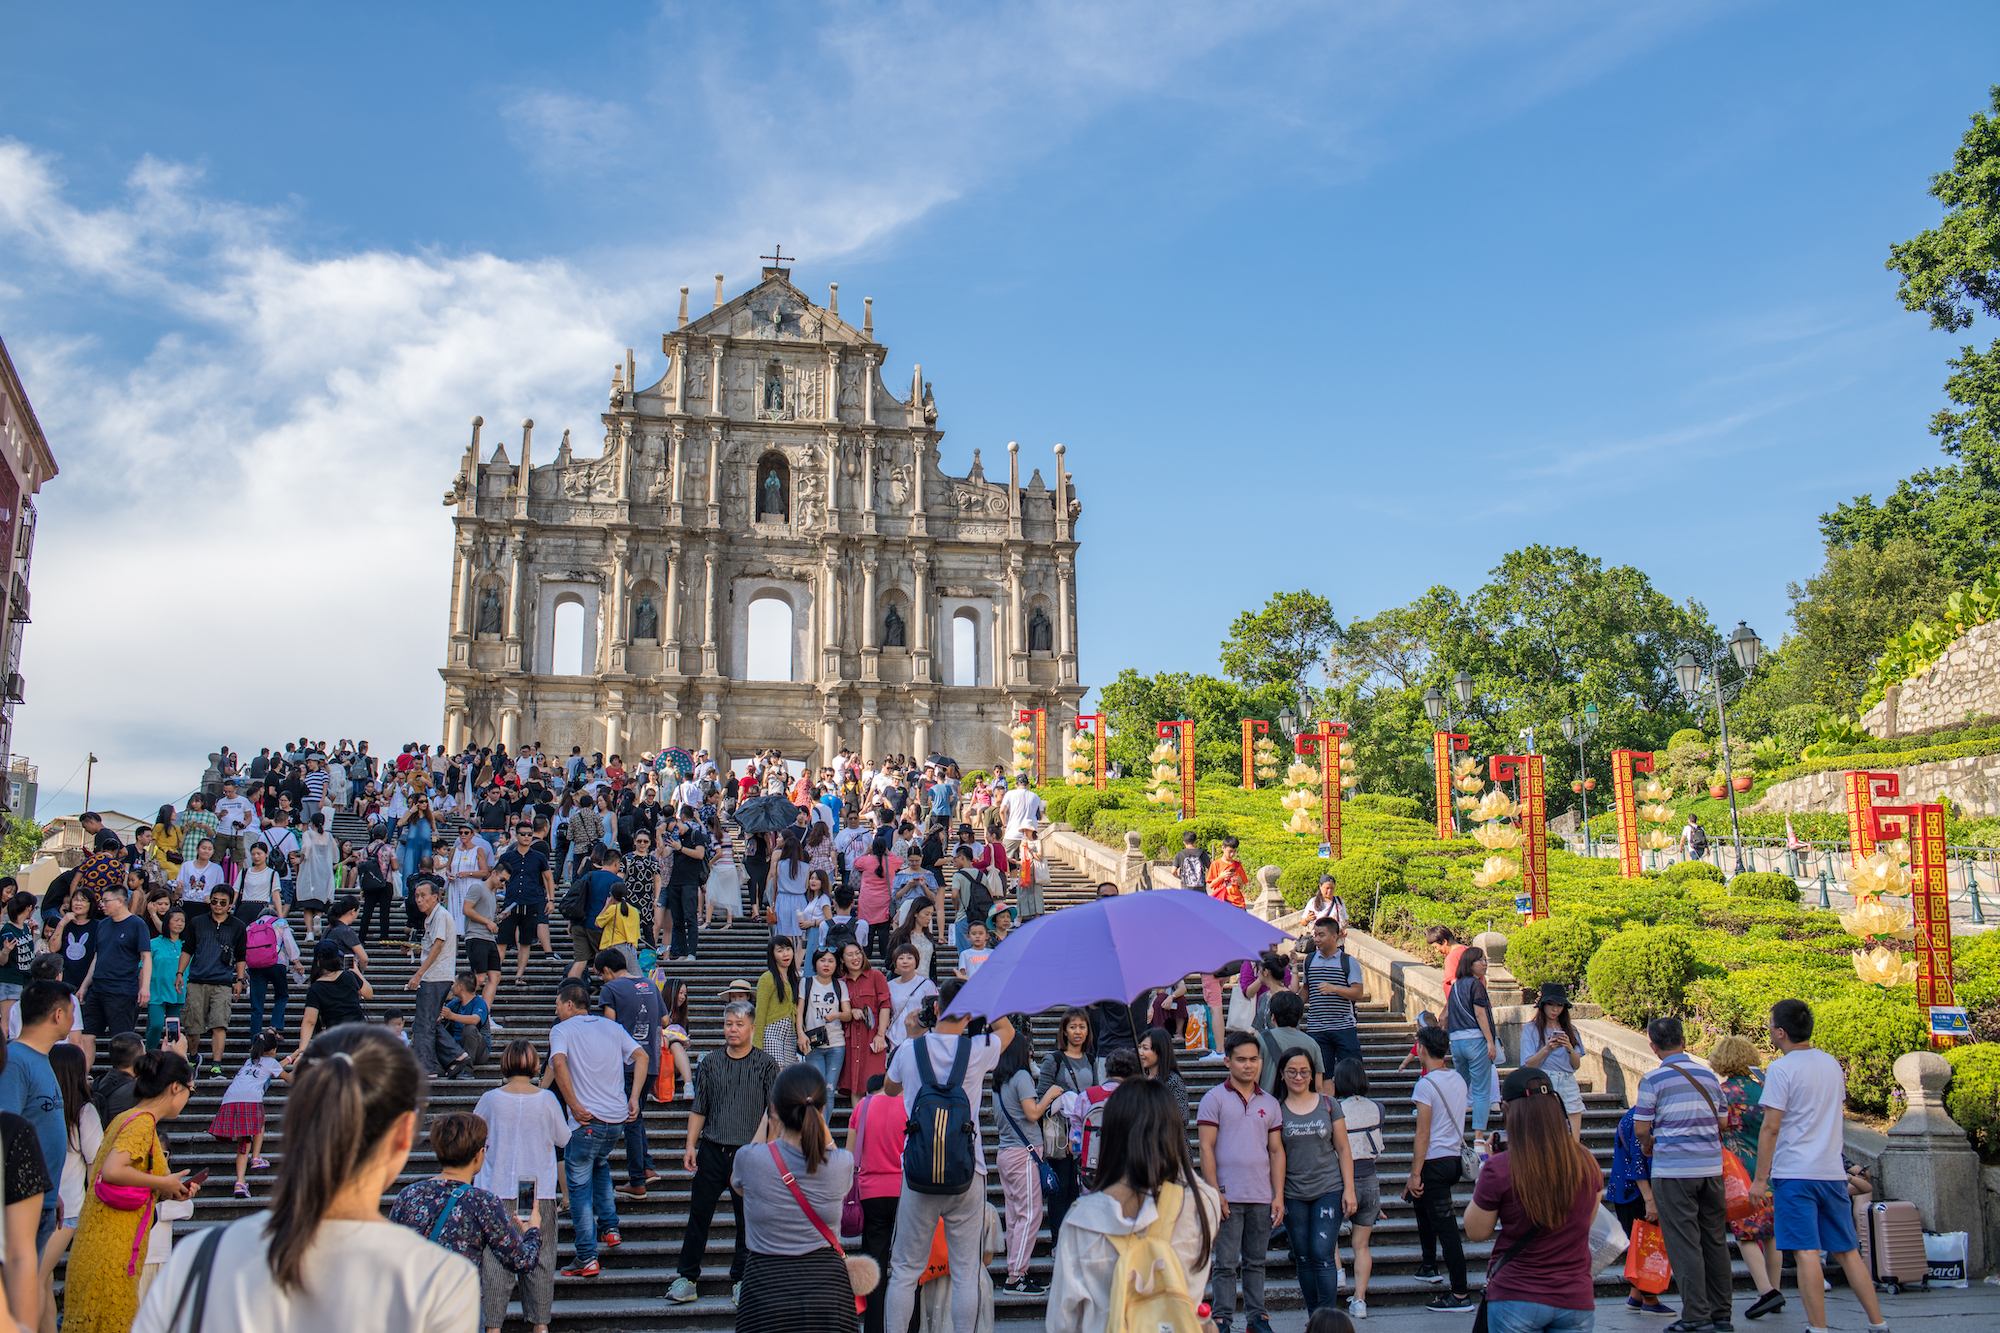 Foreign tourists are up since the first half of the year, but their numbers have plateaued